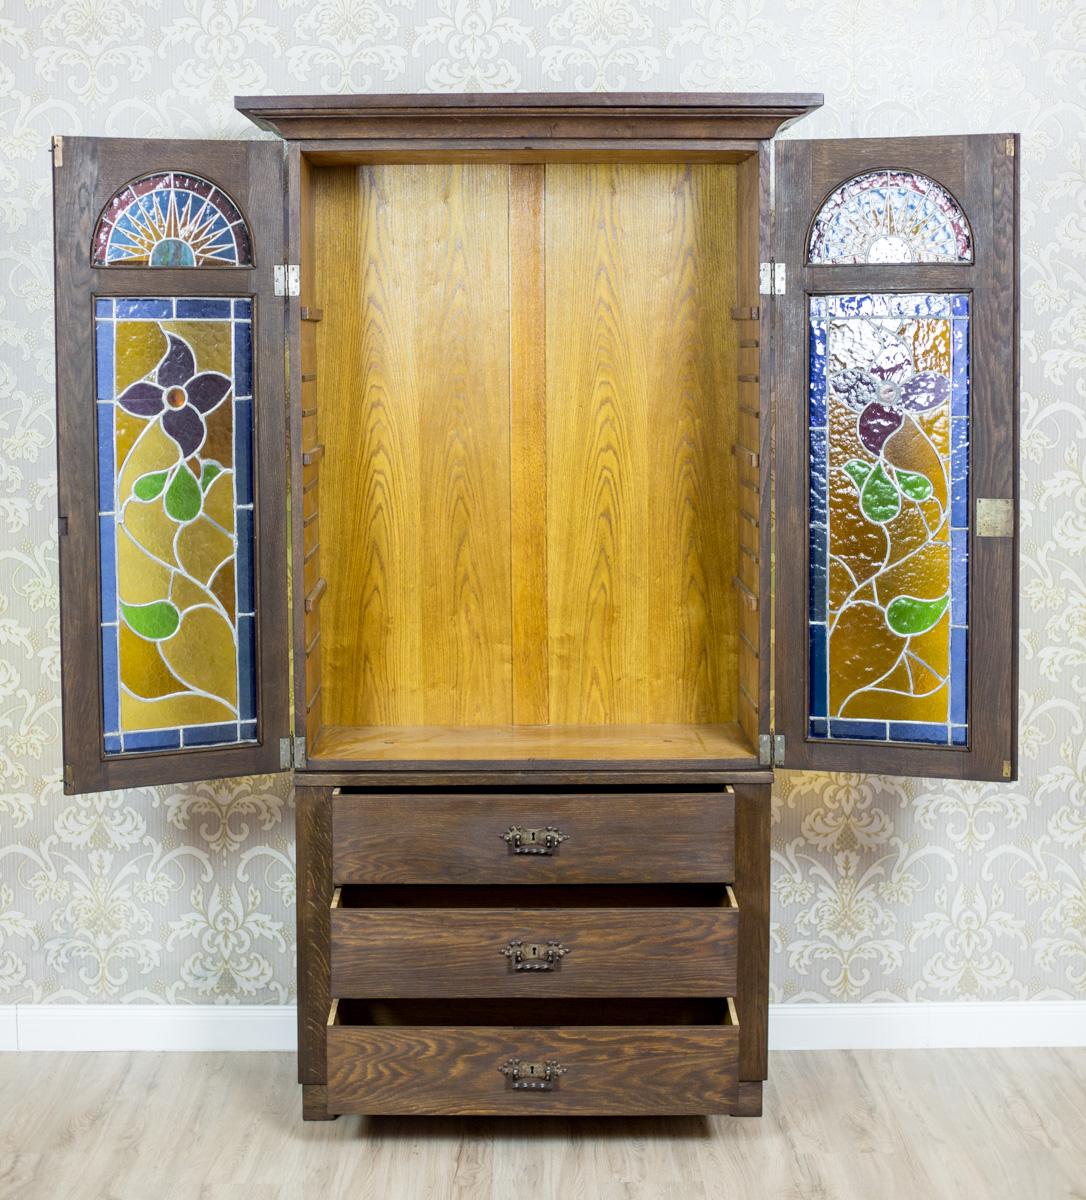 European Two-Piece Closet or Cupboard with Stained Glass, circa 1930